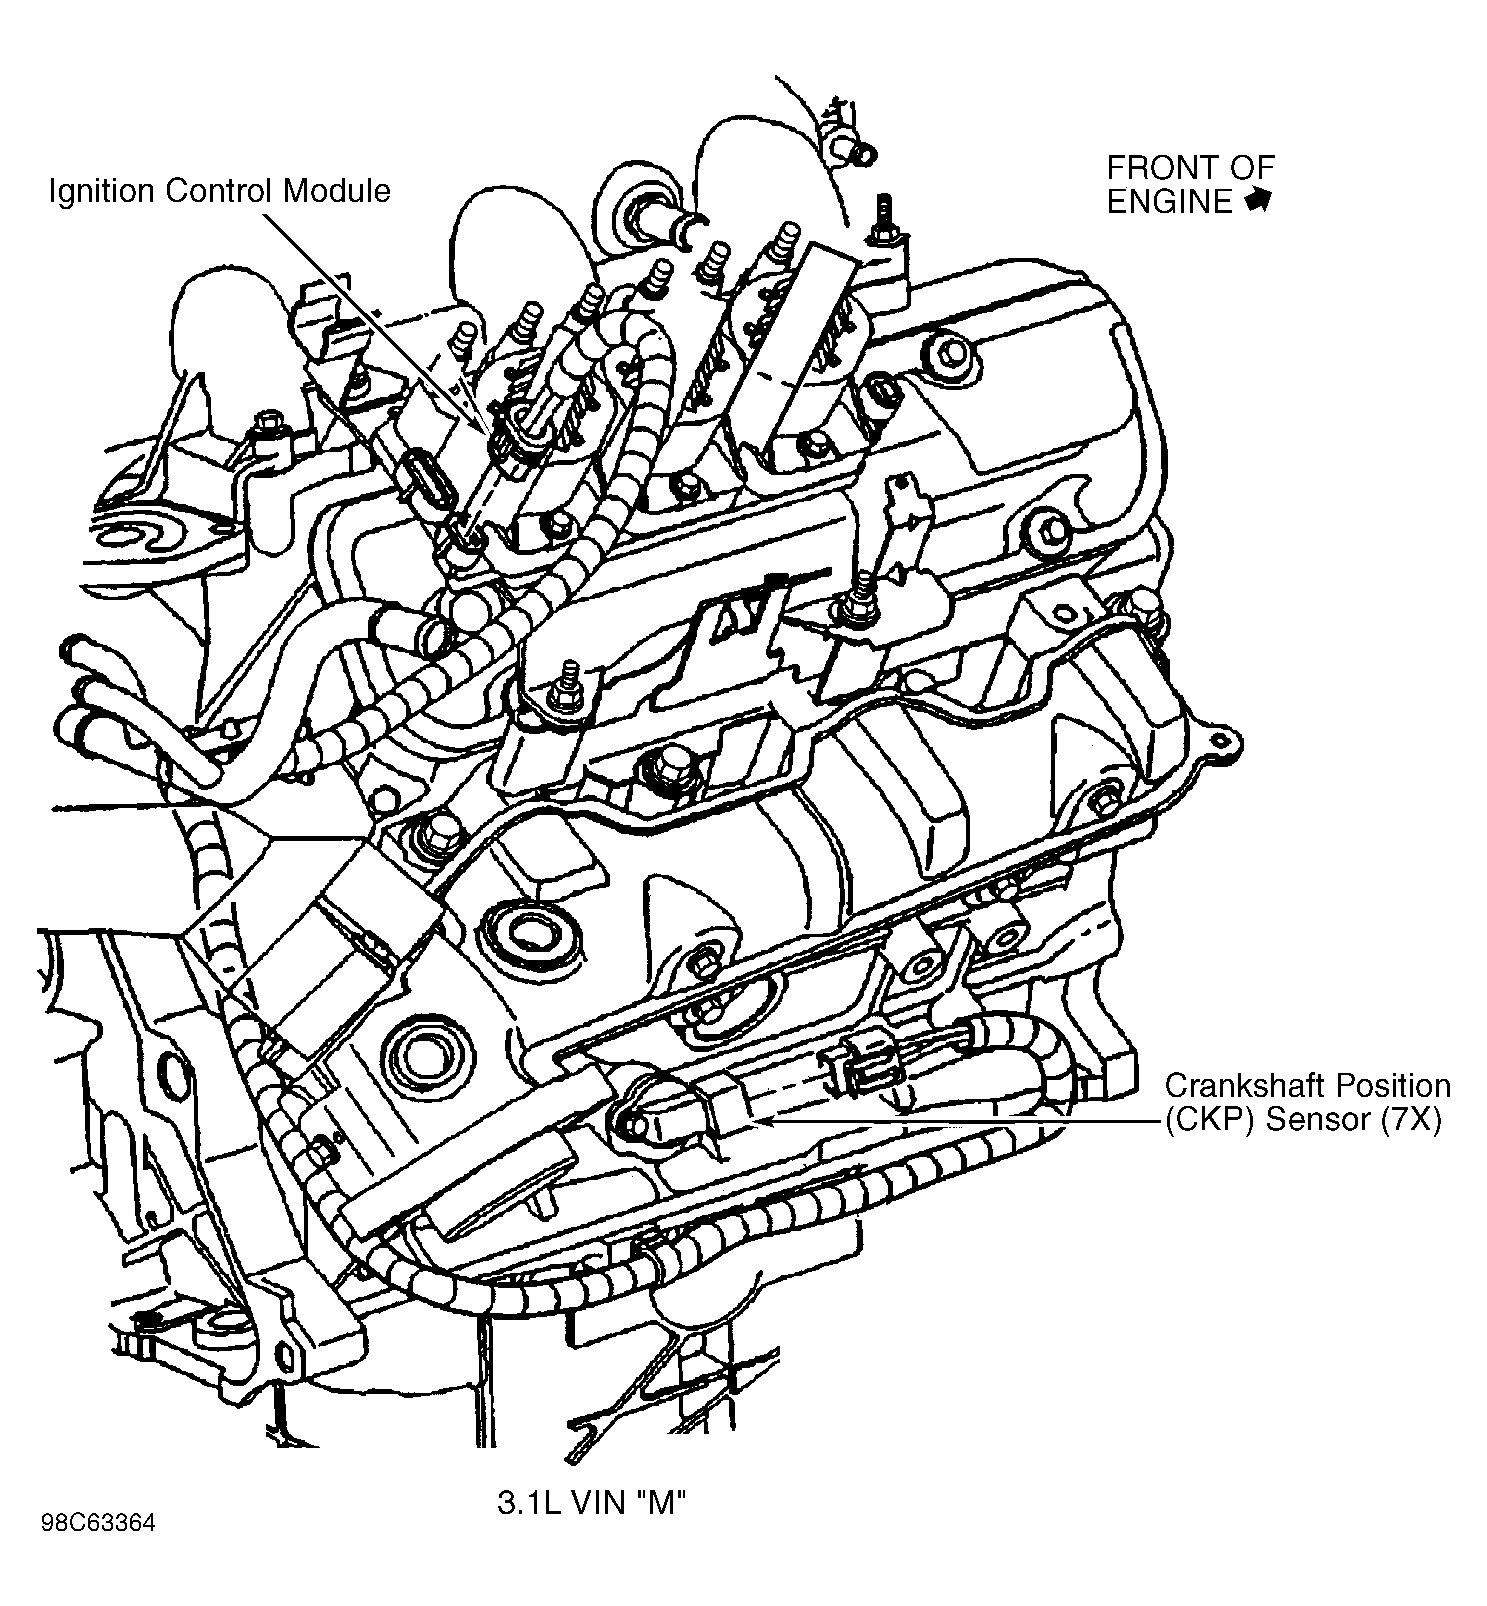 Chevrolet Lumina 2000 - Component Locations -  Right Side Of Engine (3.1L VIN M)